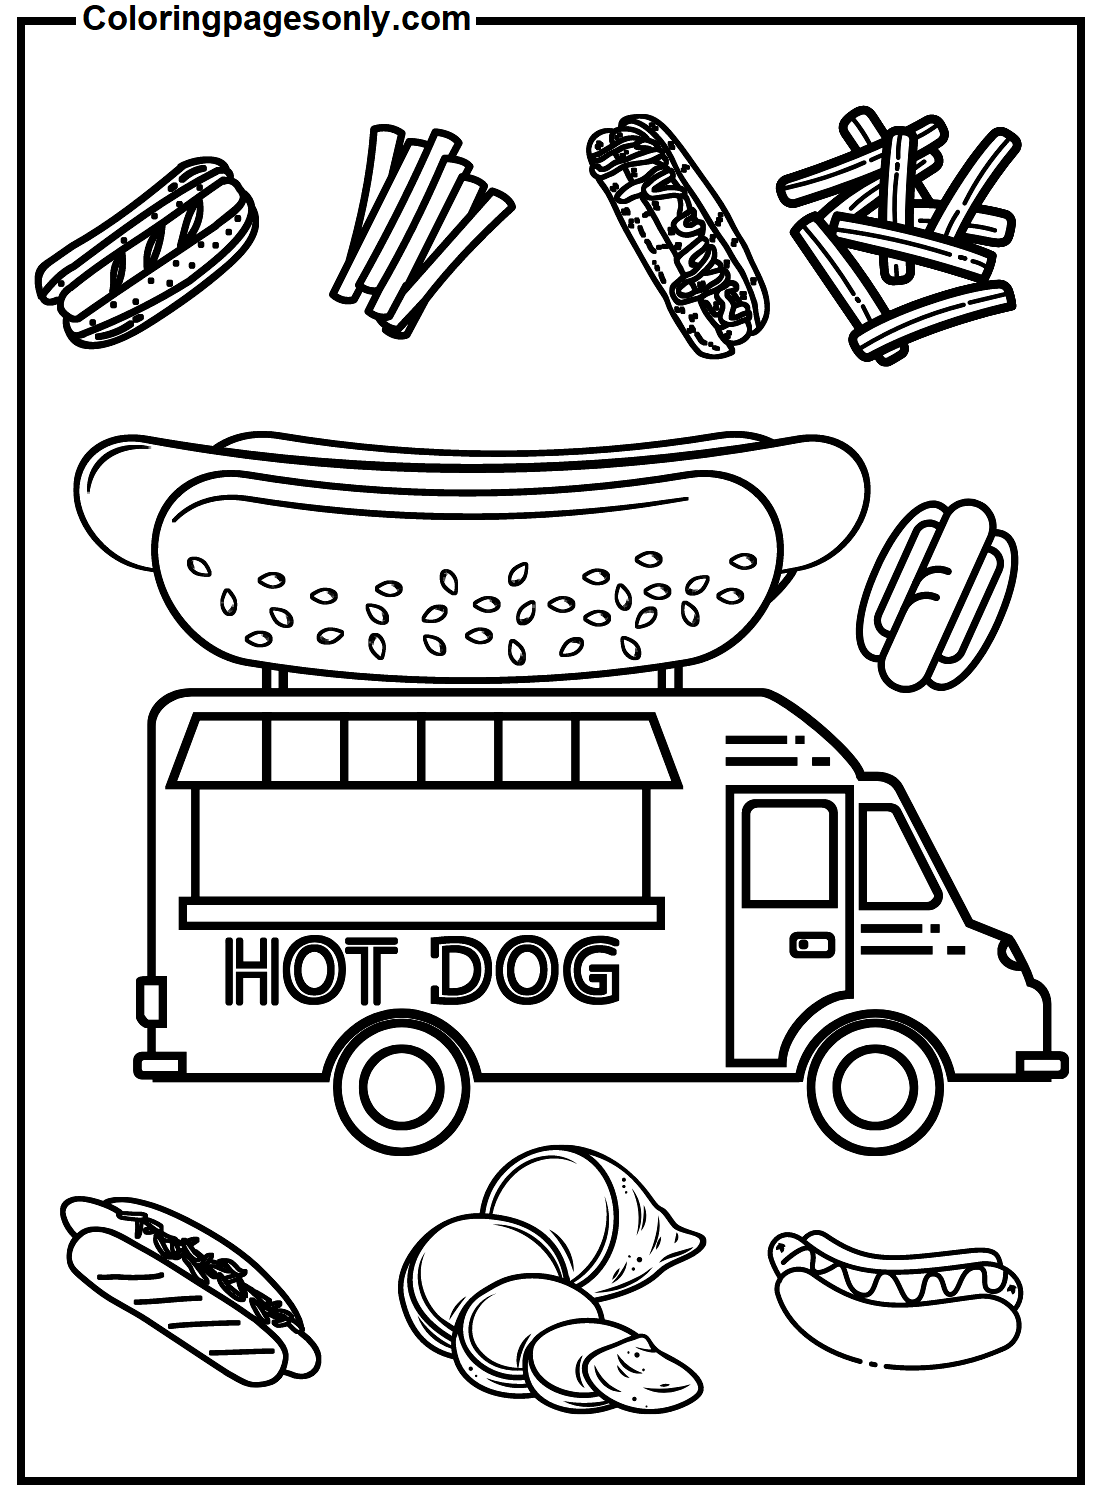 Hot Dog Food Truck Coloring Pages